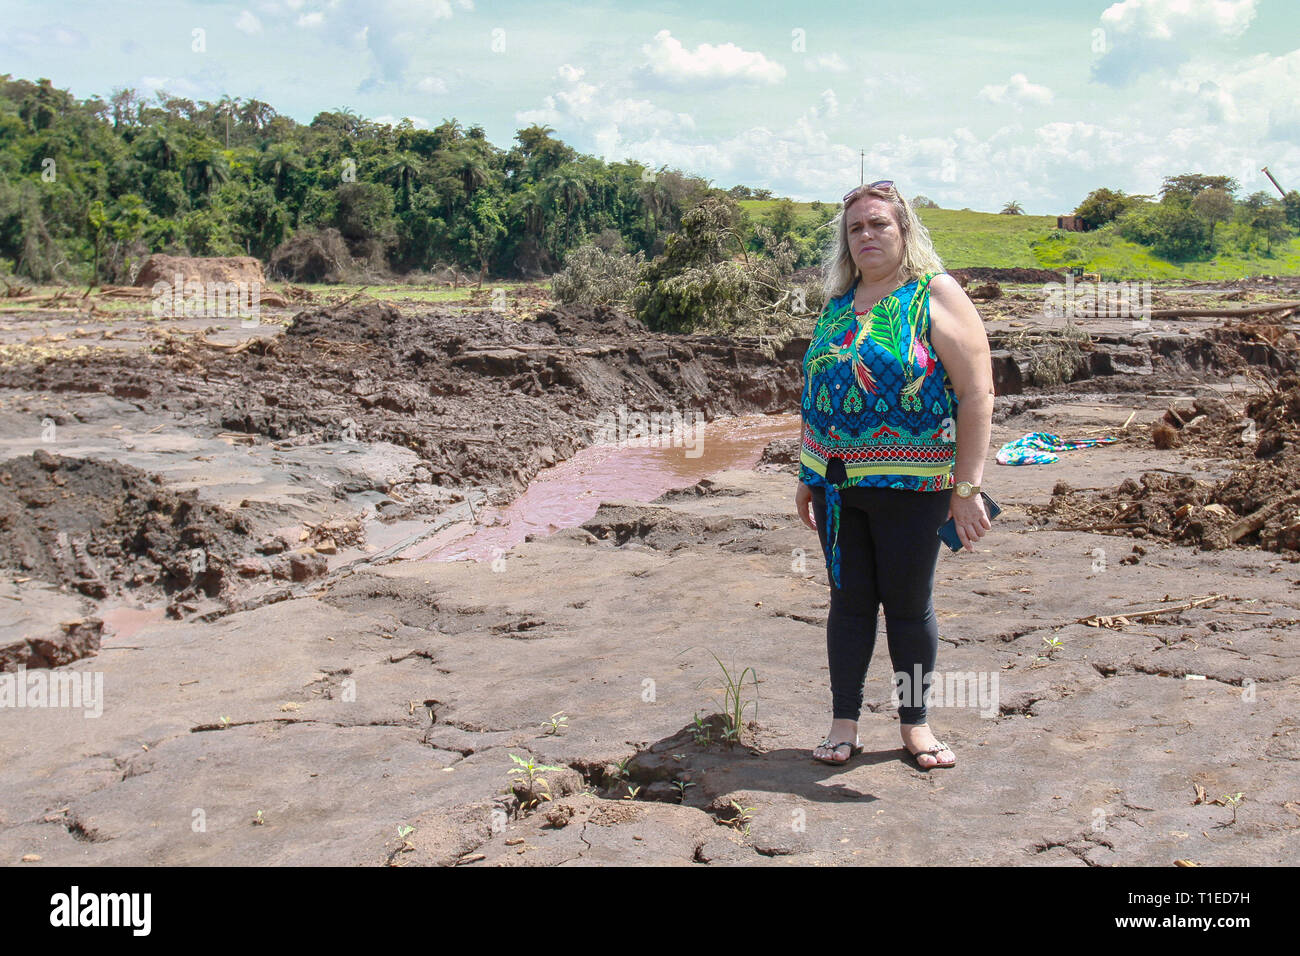 Brumadinho, Brazil. 18th Mar, 2019. Sueli de Oliveira Costa, sales manager, stands on the devastated earth. Her husband, Paulo Giovani dos Santos, died in the breach of the dam on 25.01.2019. The day changed the lives of thousands of people in the small Brazilian town of Brumadinho. Two months later, anger, grief and despair rule. (to dpa 'Everything is gone' - inhabitants of Brumadinho suffer from perineal tragedy') Credit: Rodney Costa/dpa/Alamy Live News Stock Photo